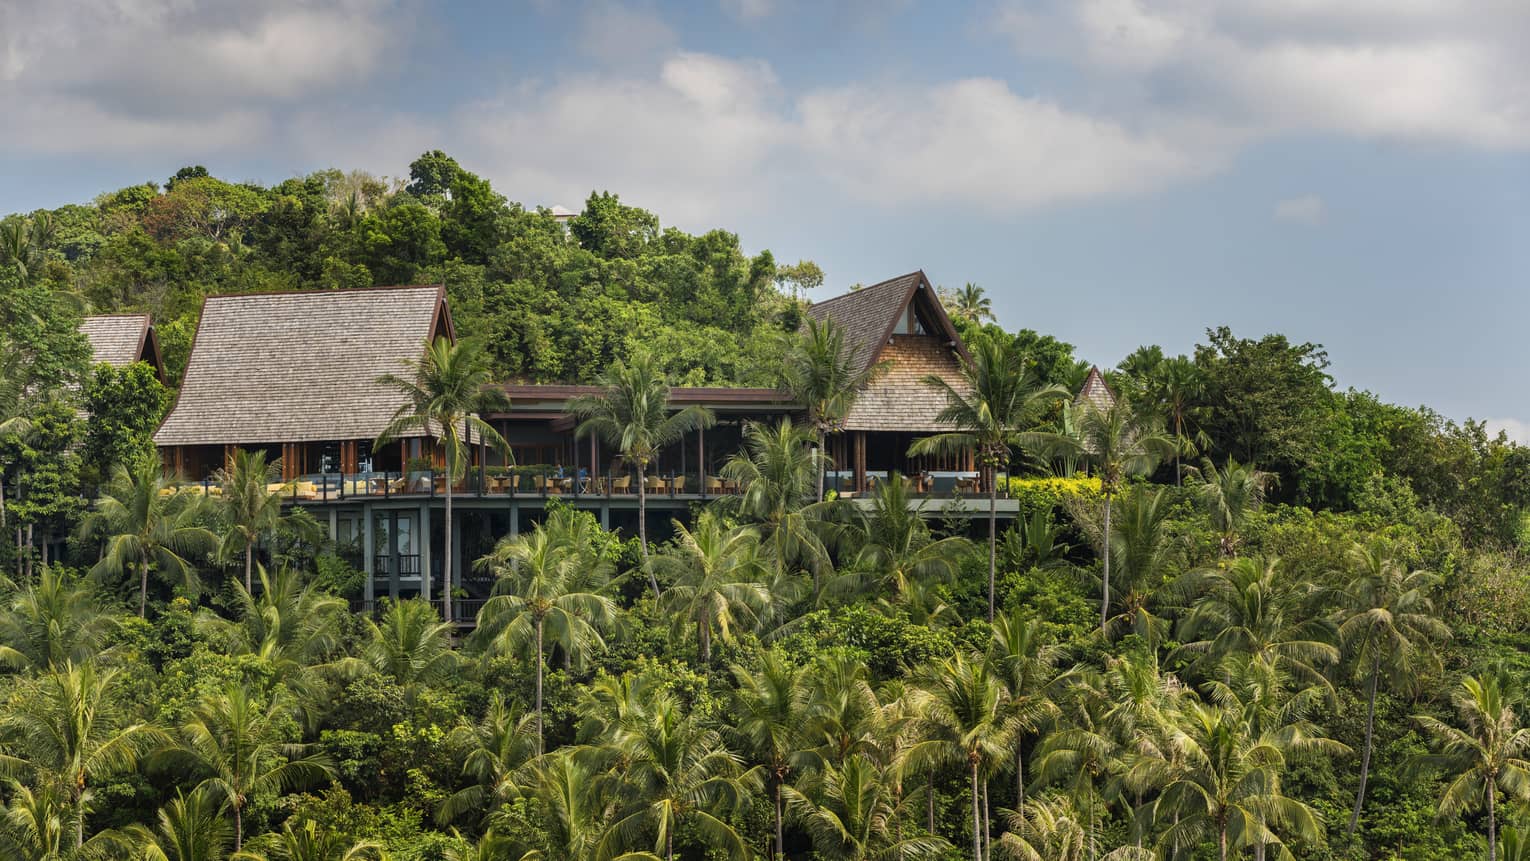 Exterior view of KOH Thai Kitchen and Bar building, perched on mountain amid tropical trees